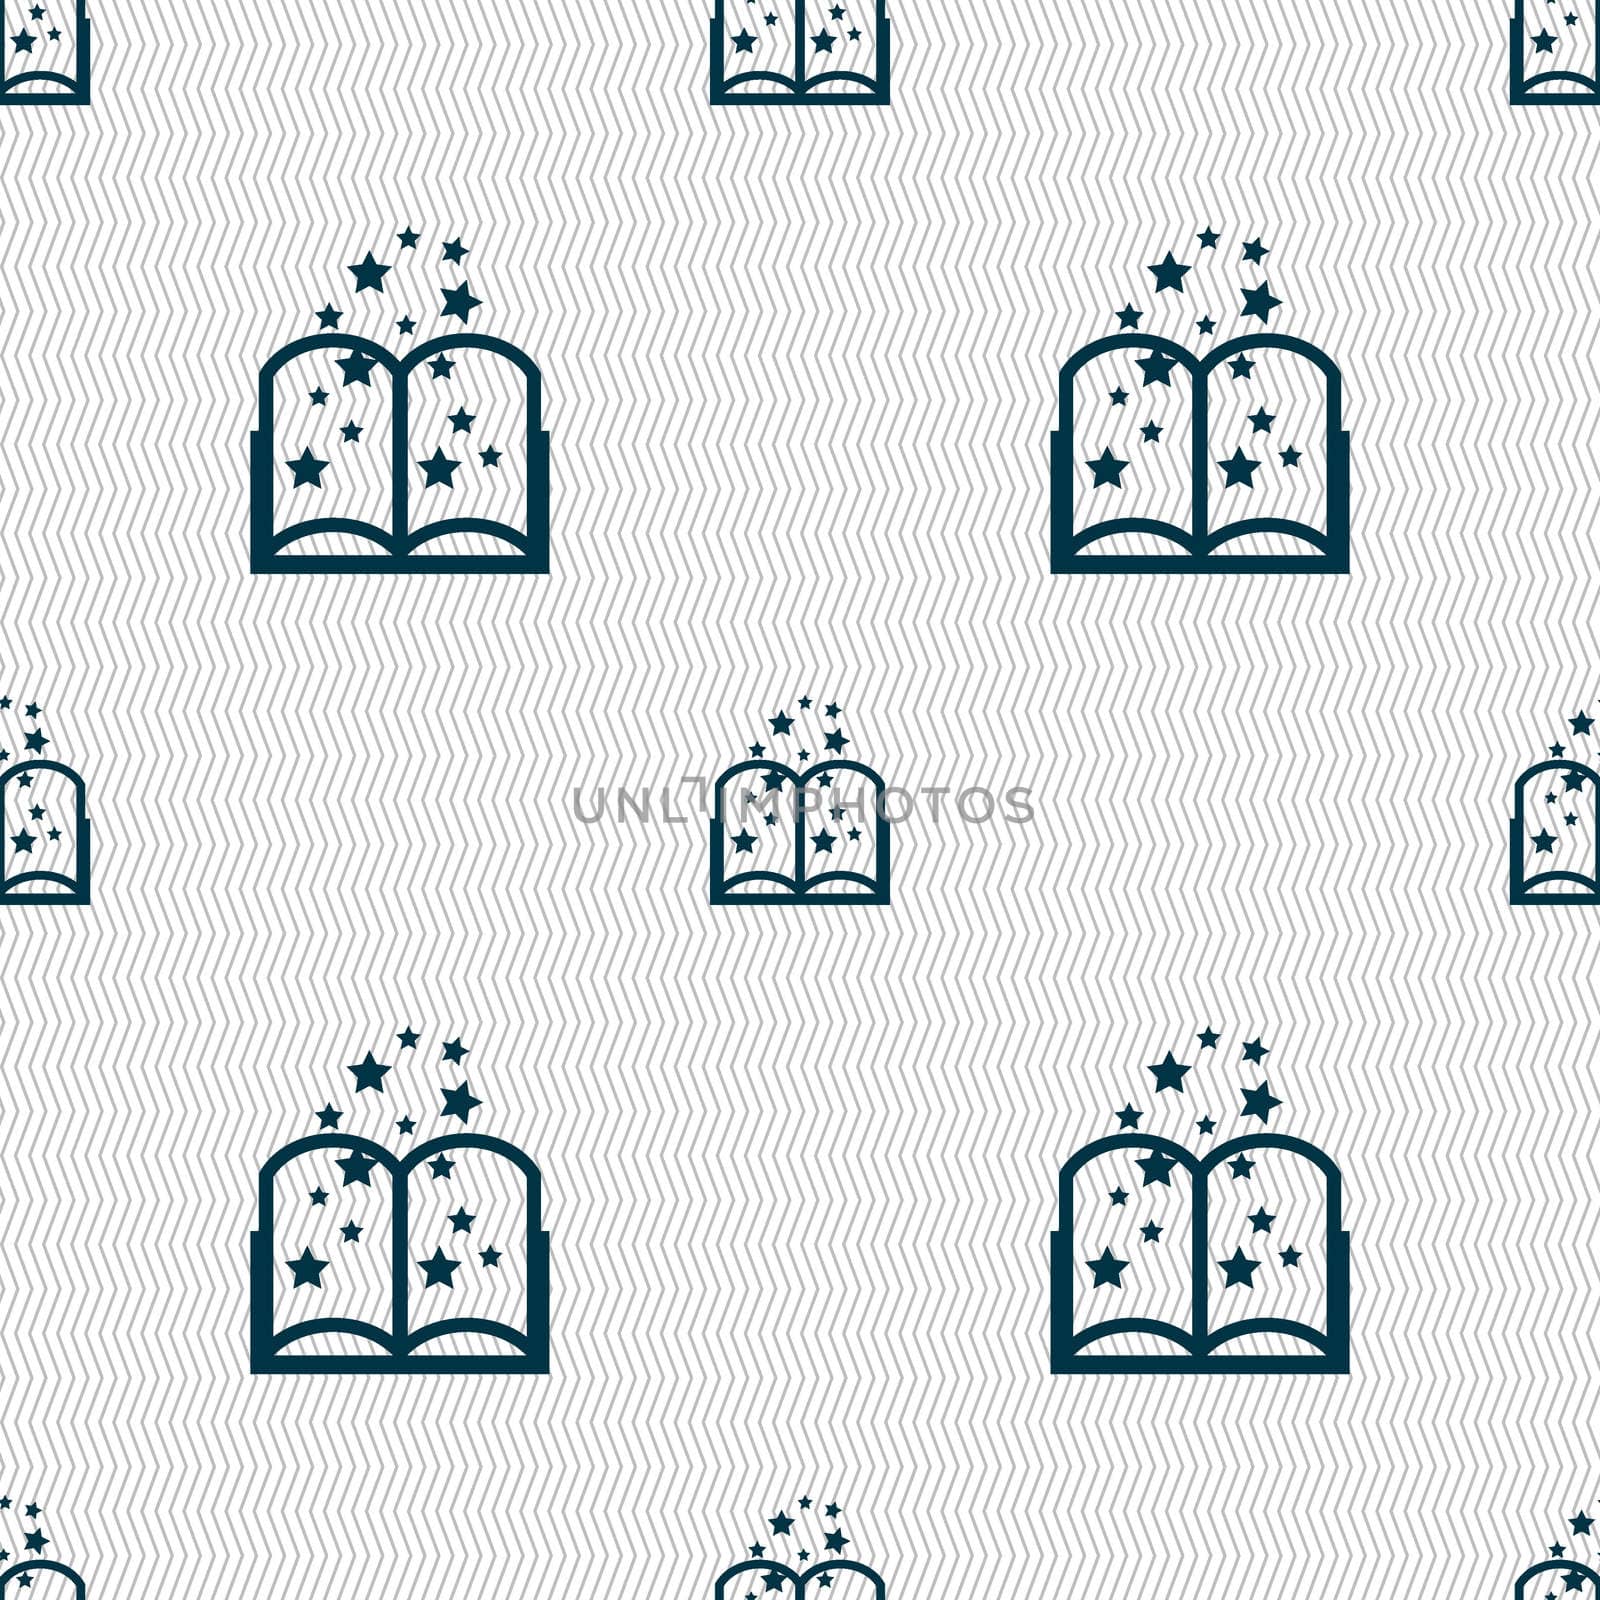 Magic Book sign icon. Open book symbol. Seamless abstract background with geometric shapes. illustration